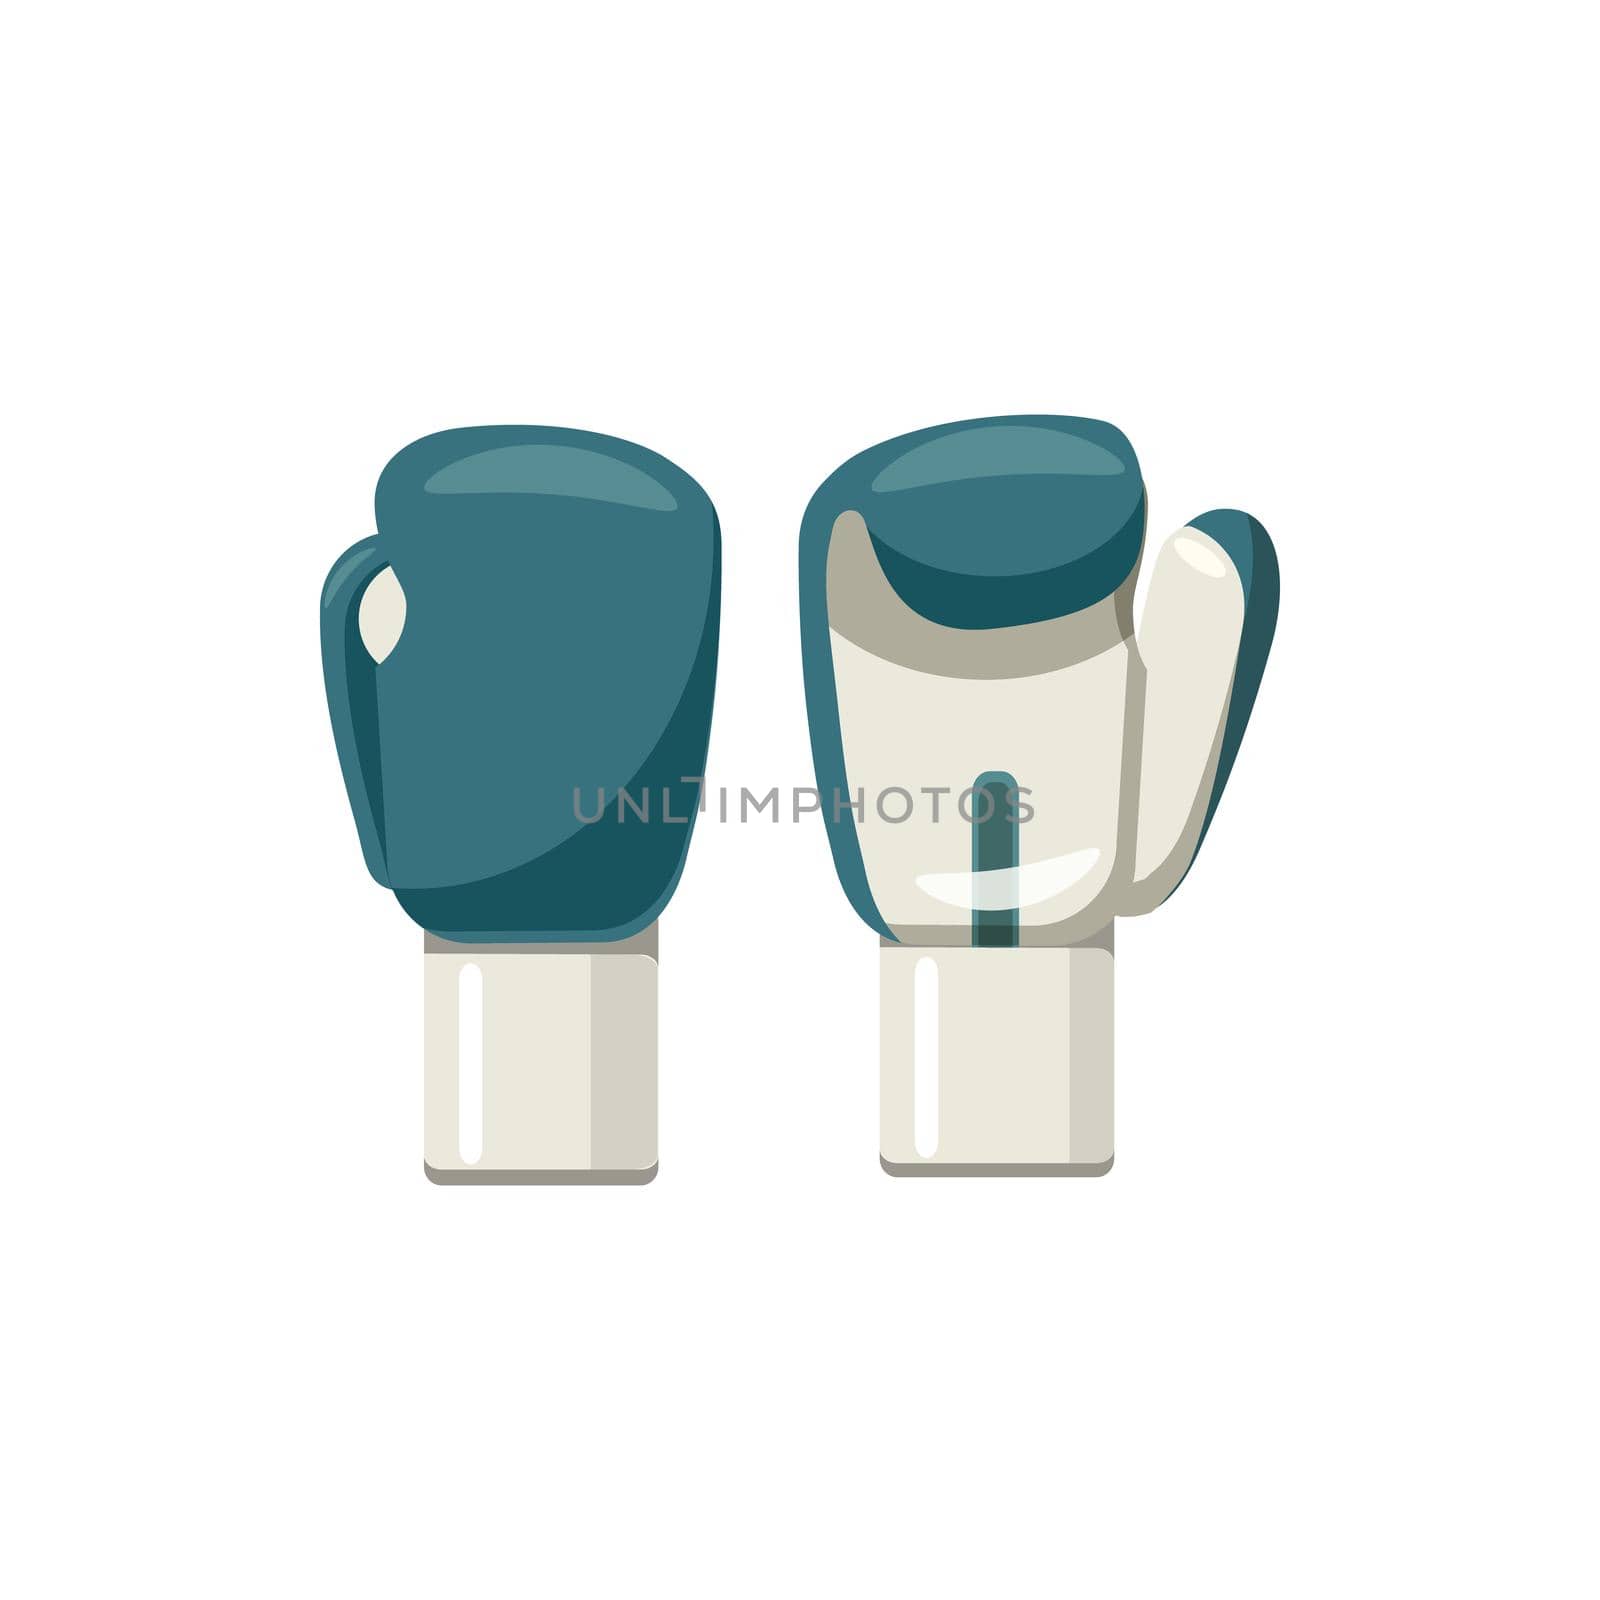 Boxing gloves icon, cartoon style by ylivdesign